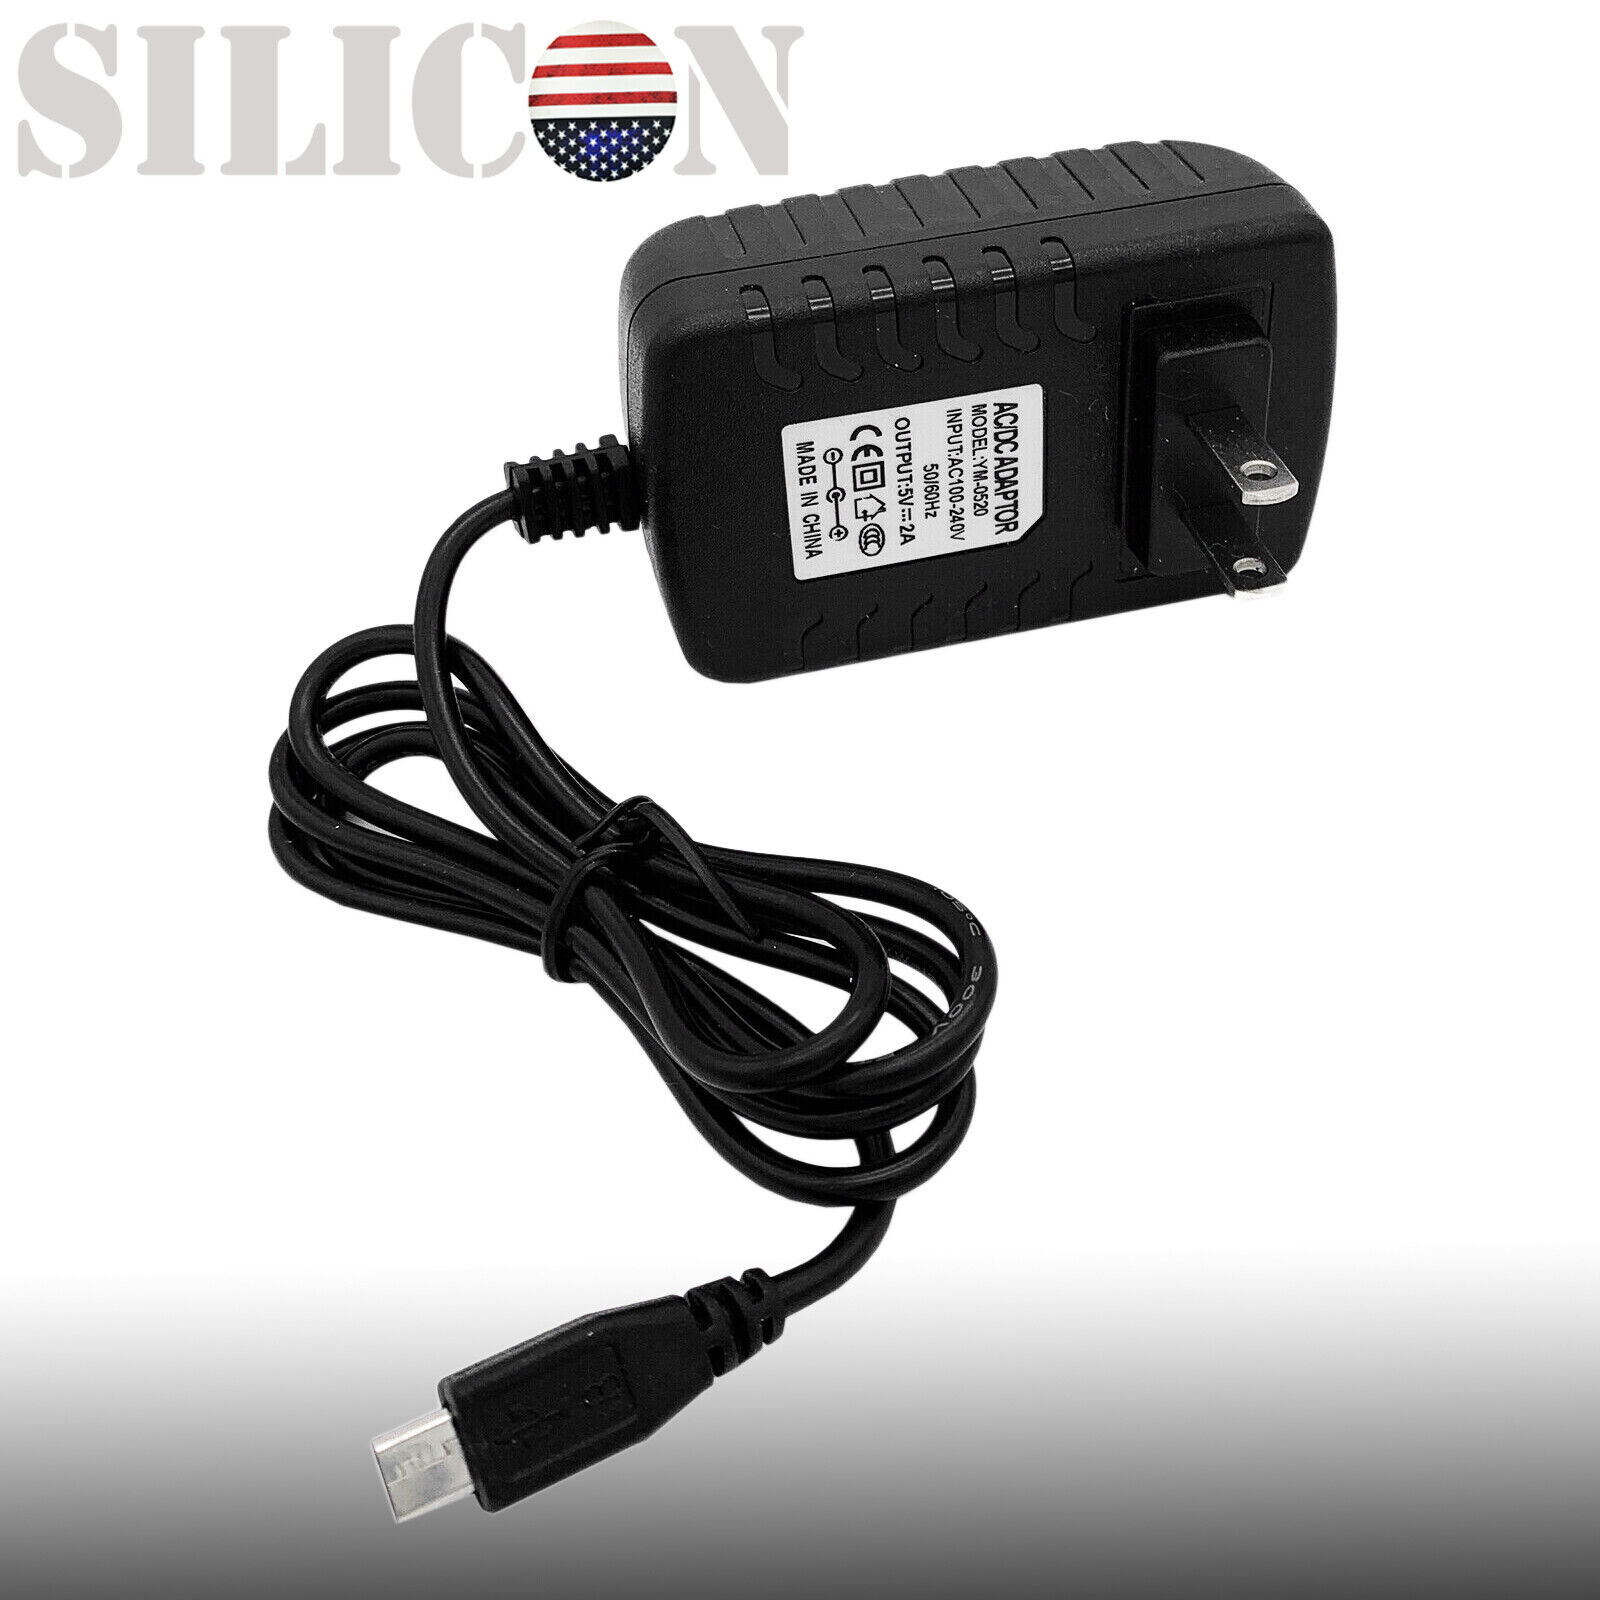 2A AC/DC Wall Charger For Barnes & Noble Nook BNRV200 BNRV200A Tablet EREADER 2A AC/DC Wall Charger For Barnes & Noble